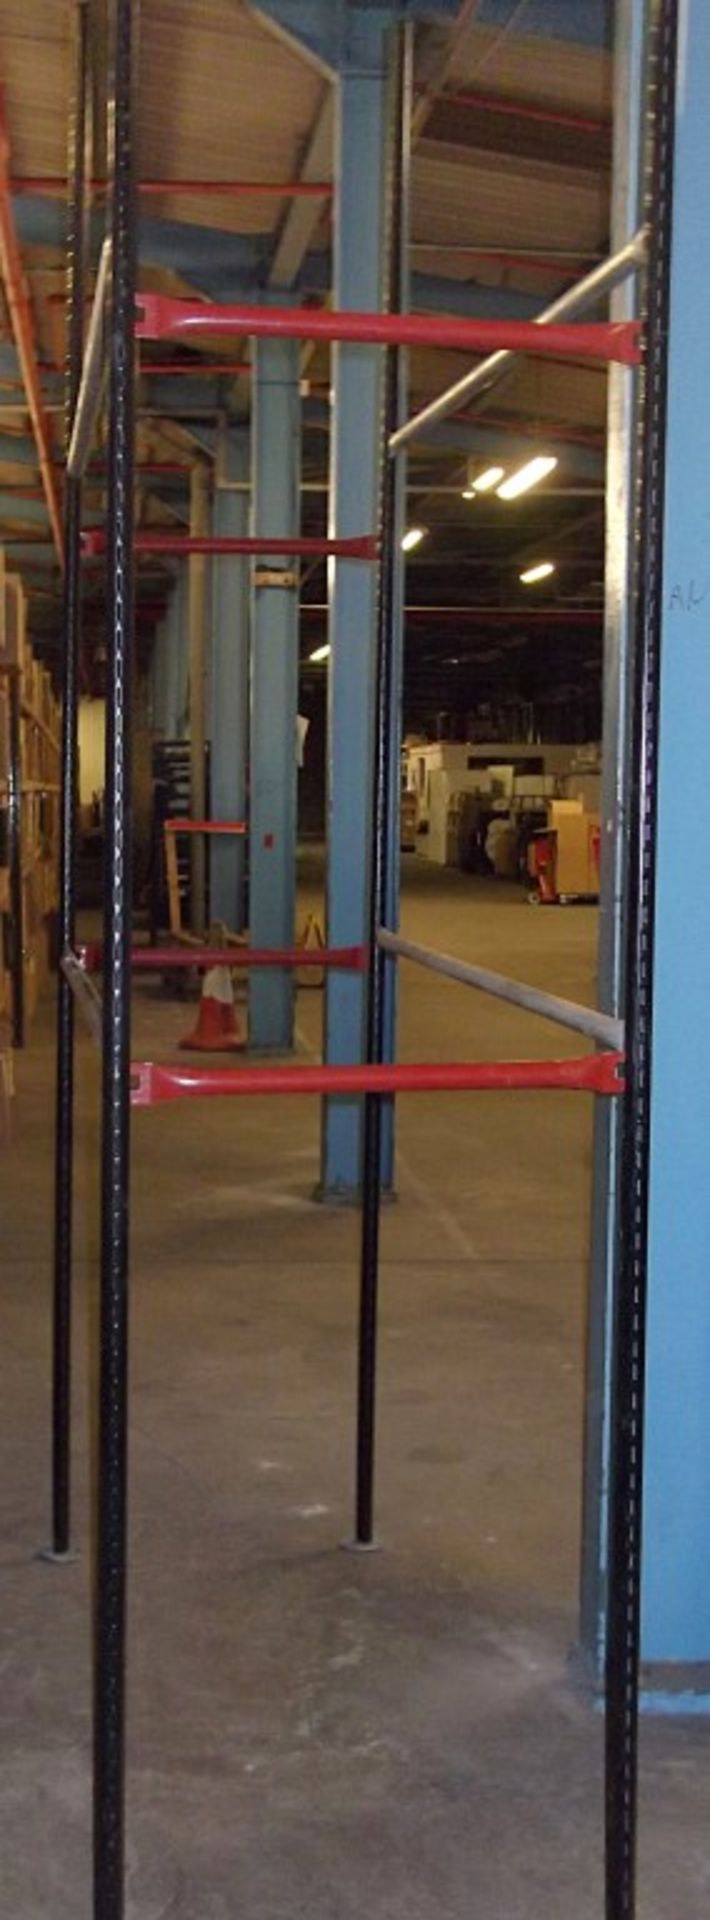 2 x Bays Of Hanging Garment Railing / Dress Racking - 10ft Tall - Pre-used In Good Condition, With - Image 5 of 7